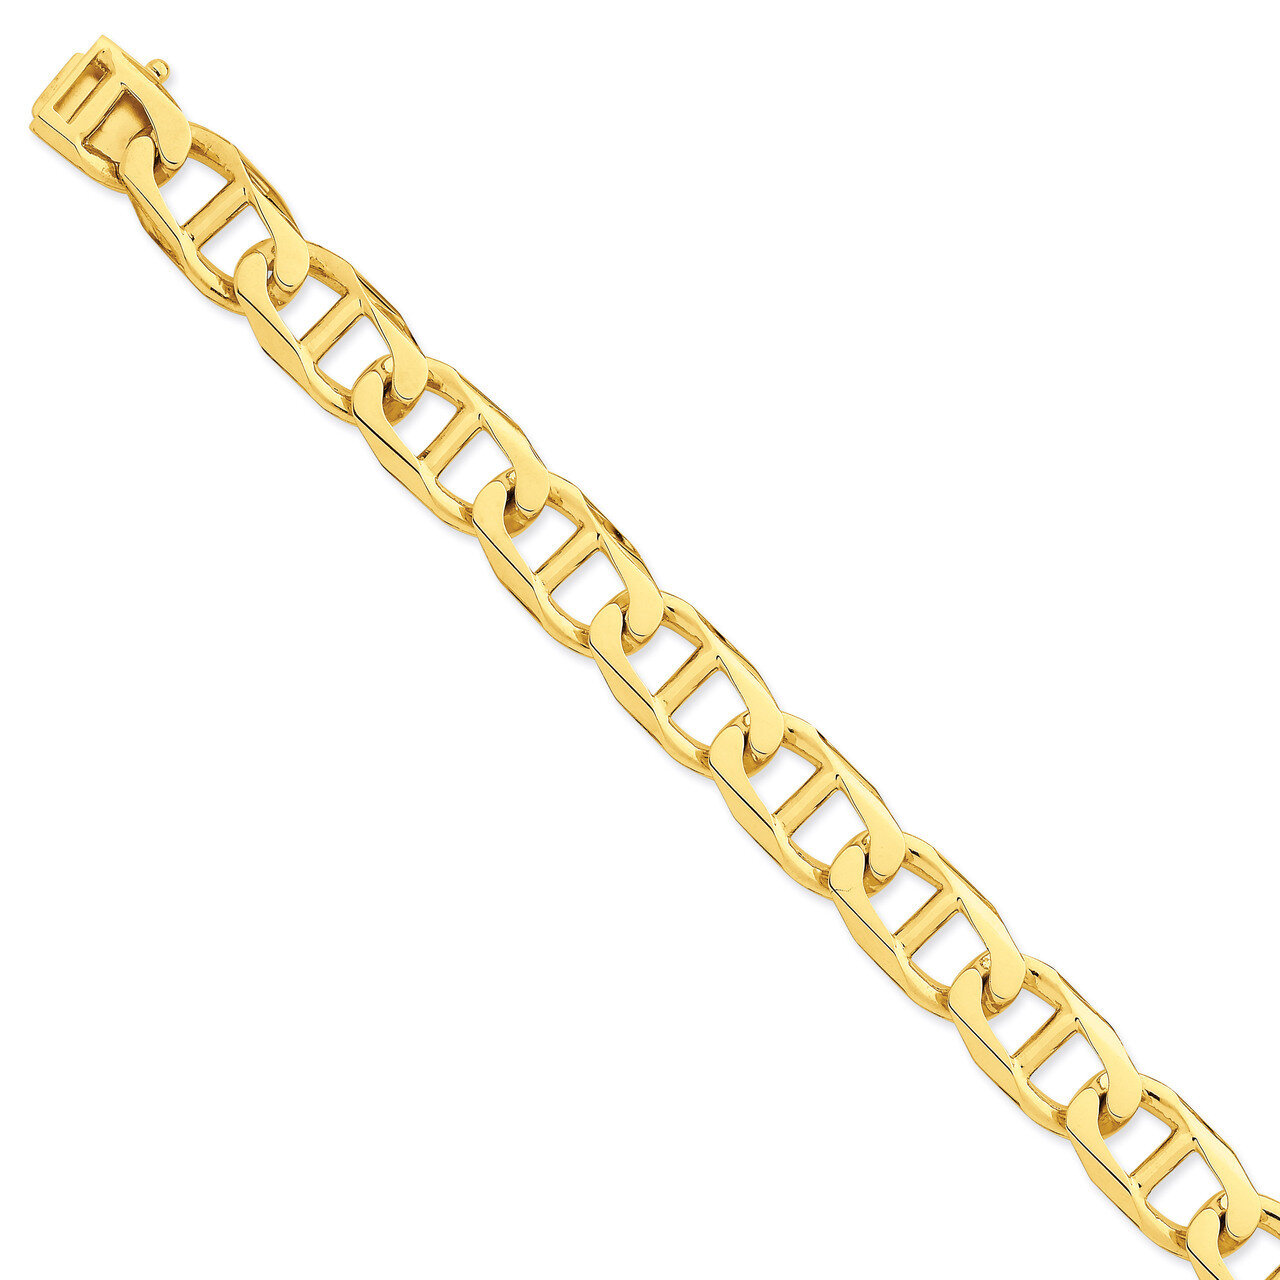 13mm Hand-Polished Anchor Link Chain 20 Inch 14k Gold LK103-20